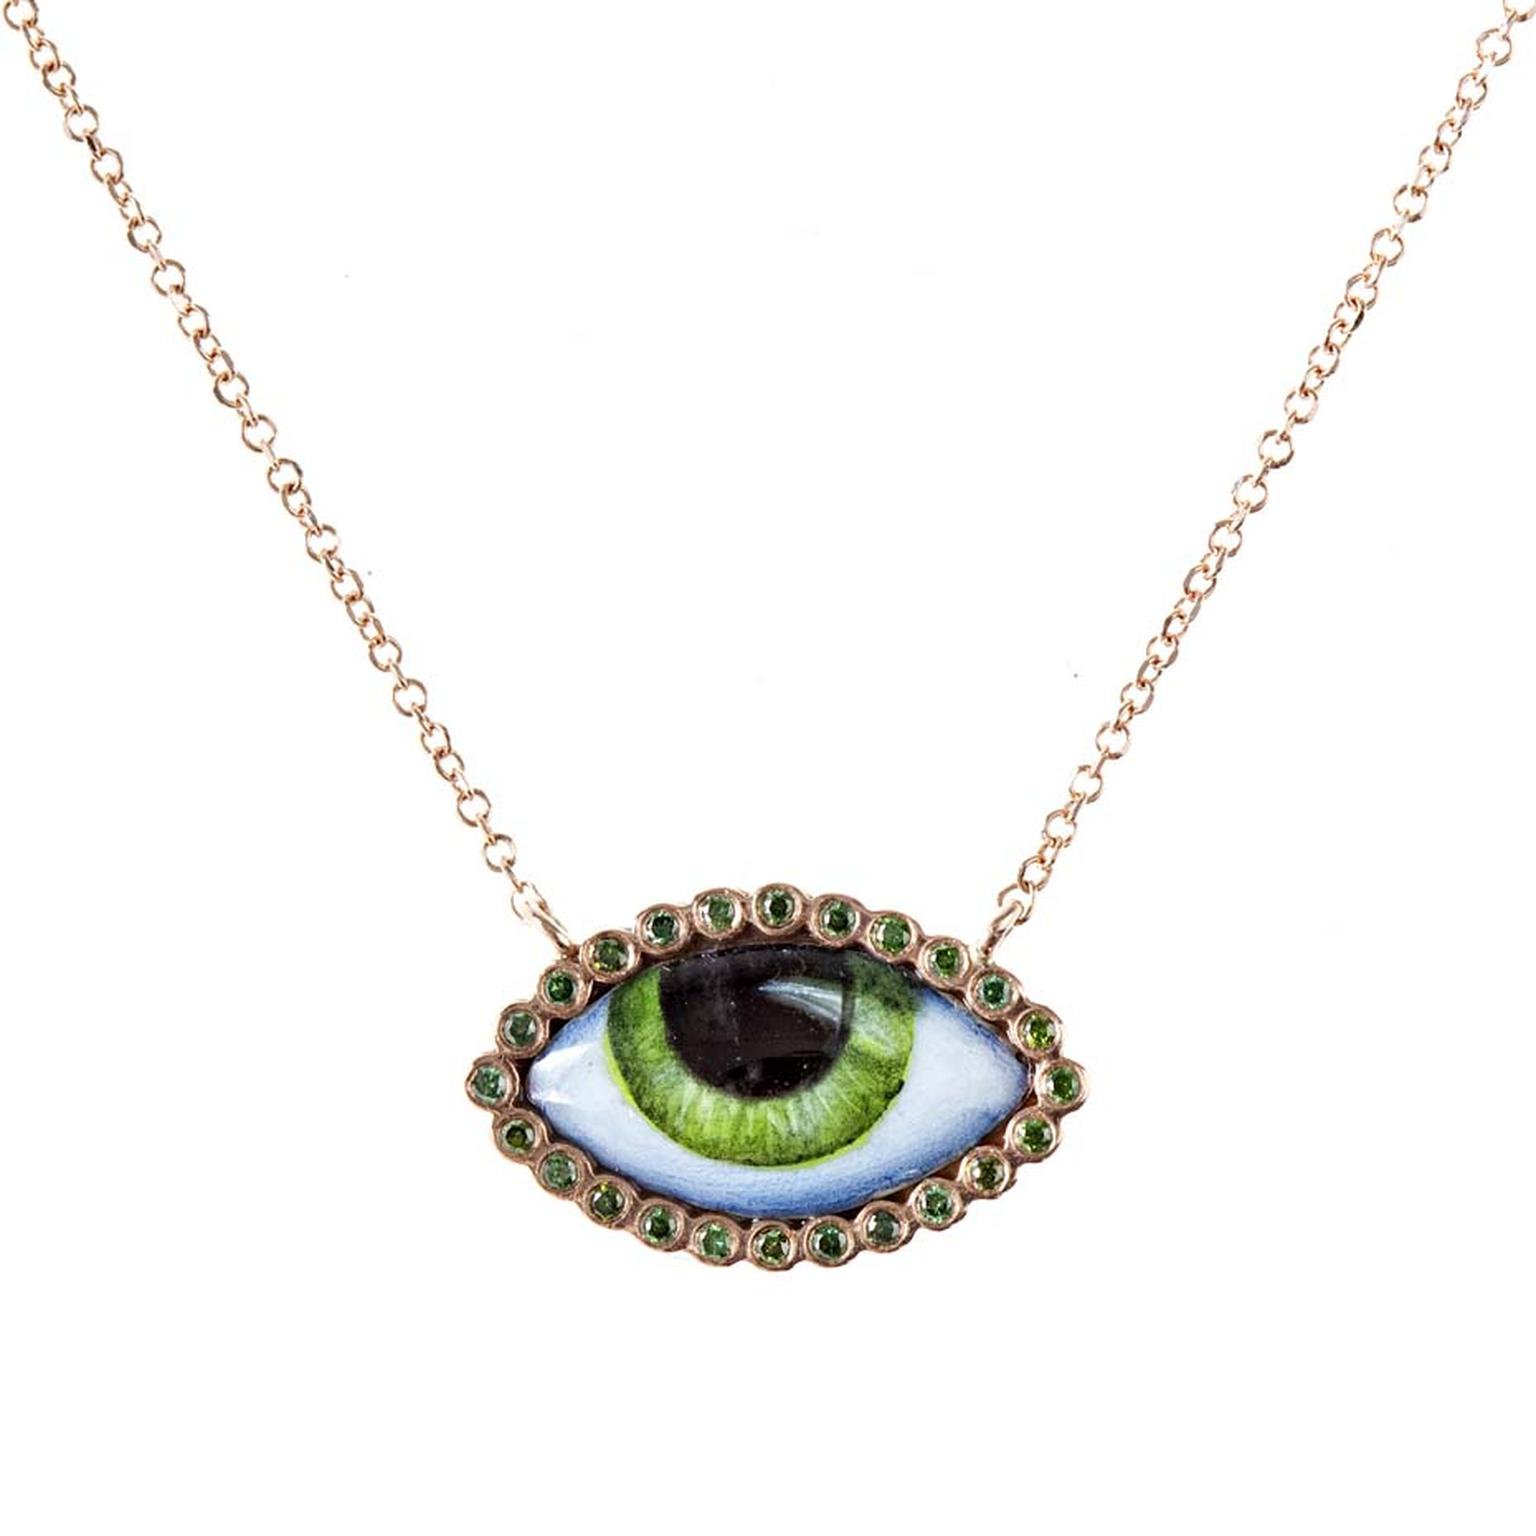 Lito Her Tu Es Partout necklace in rose gold featuring a green enamelled eye surrounded by green diamonds ($1,070).